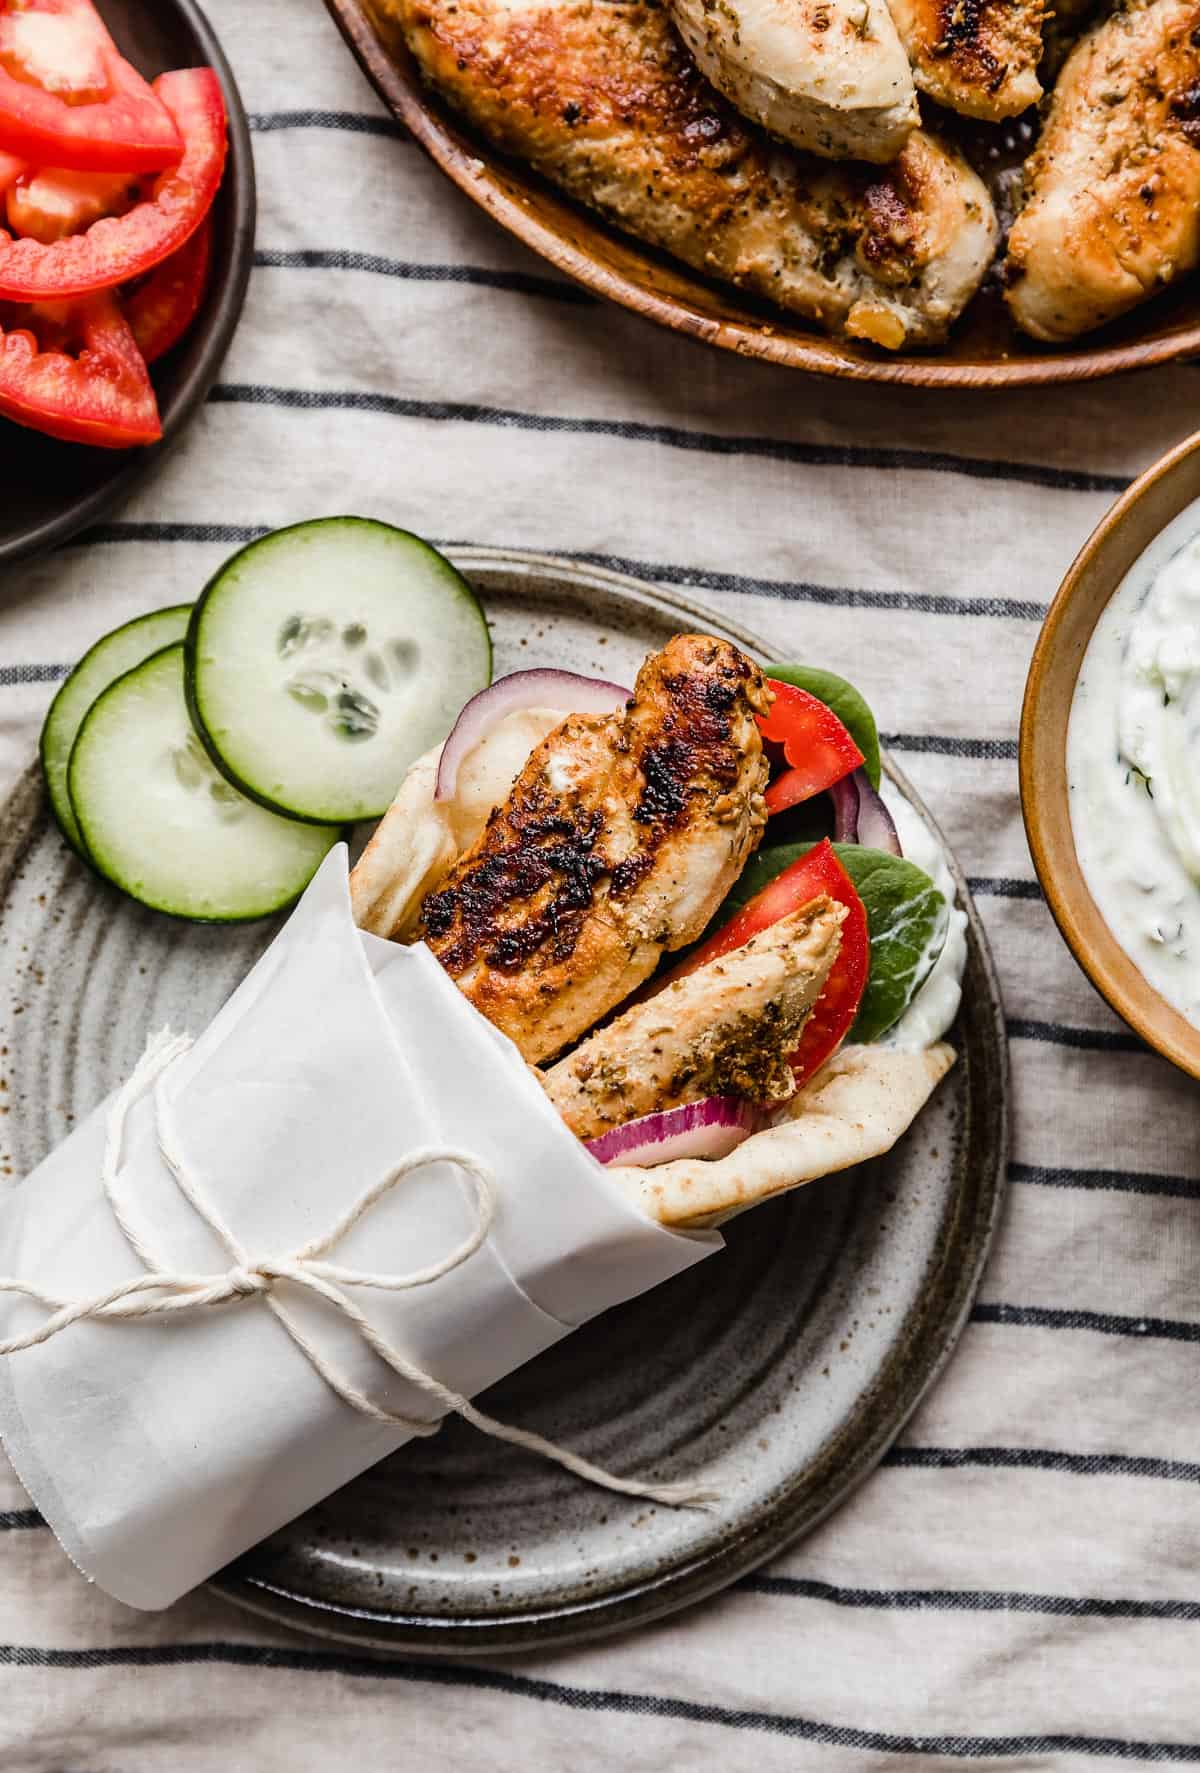 White parchment and kitchen twine wrapped around chicken tender Greek gyro on a gray plate against a white and blue striped napkin.